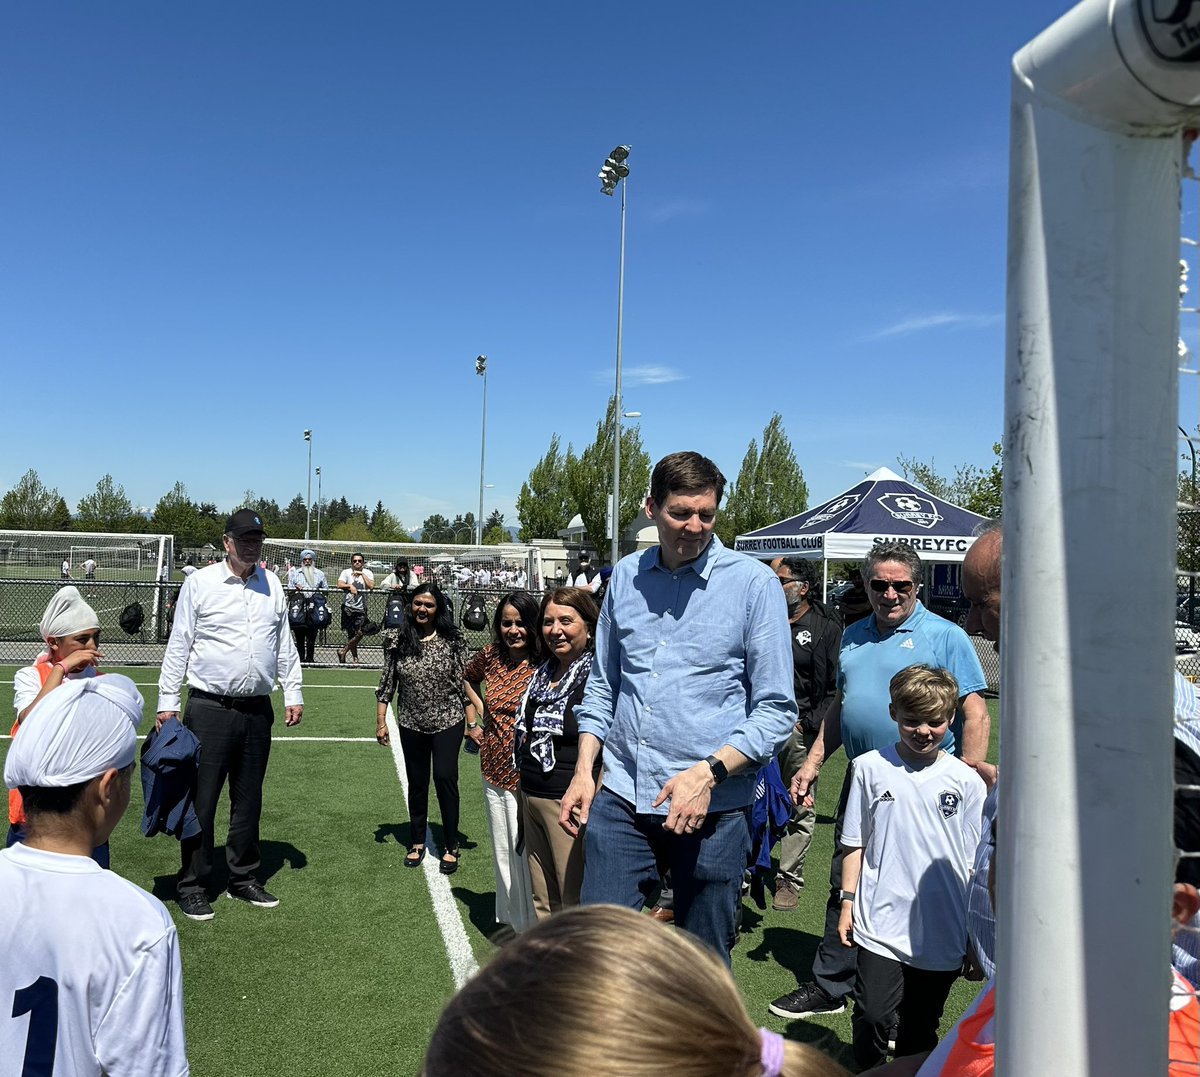 It was fun to be on the field yesterday and try to play soccer with these young athletes. They enjoyed playing with Premier @dave_eby and some of my #Surrey colleagues.  A big thank you to @_surreyfc’s staff and parent volunteers for doing such a great job.